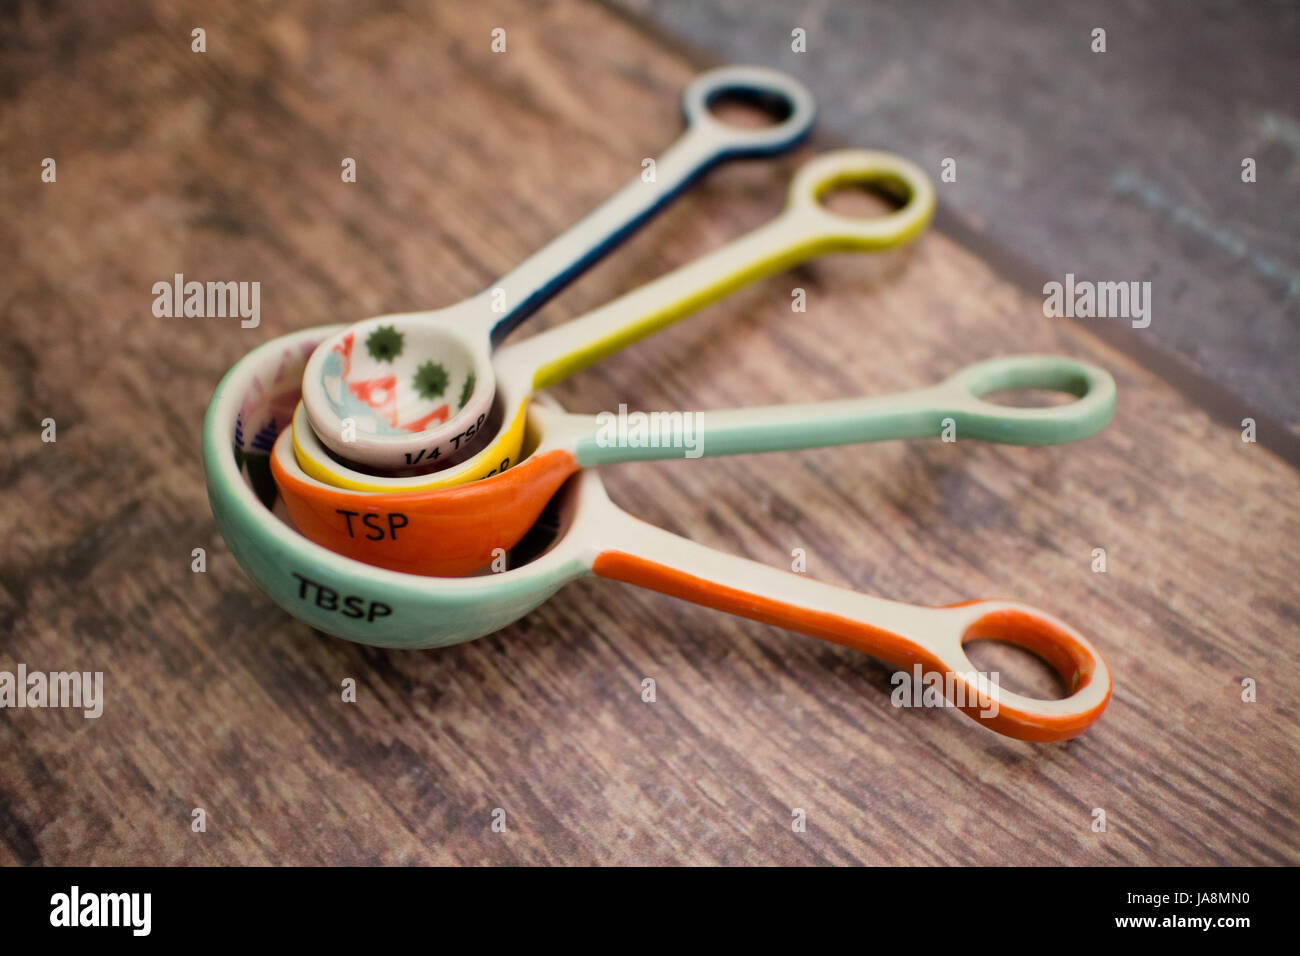 Colorful ceramic measuring spoons for cooking Stock Photo